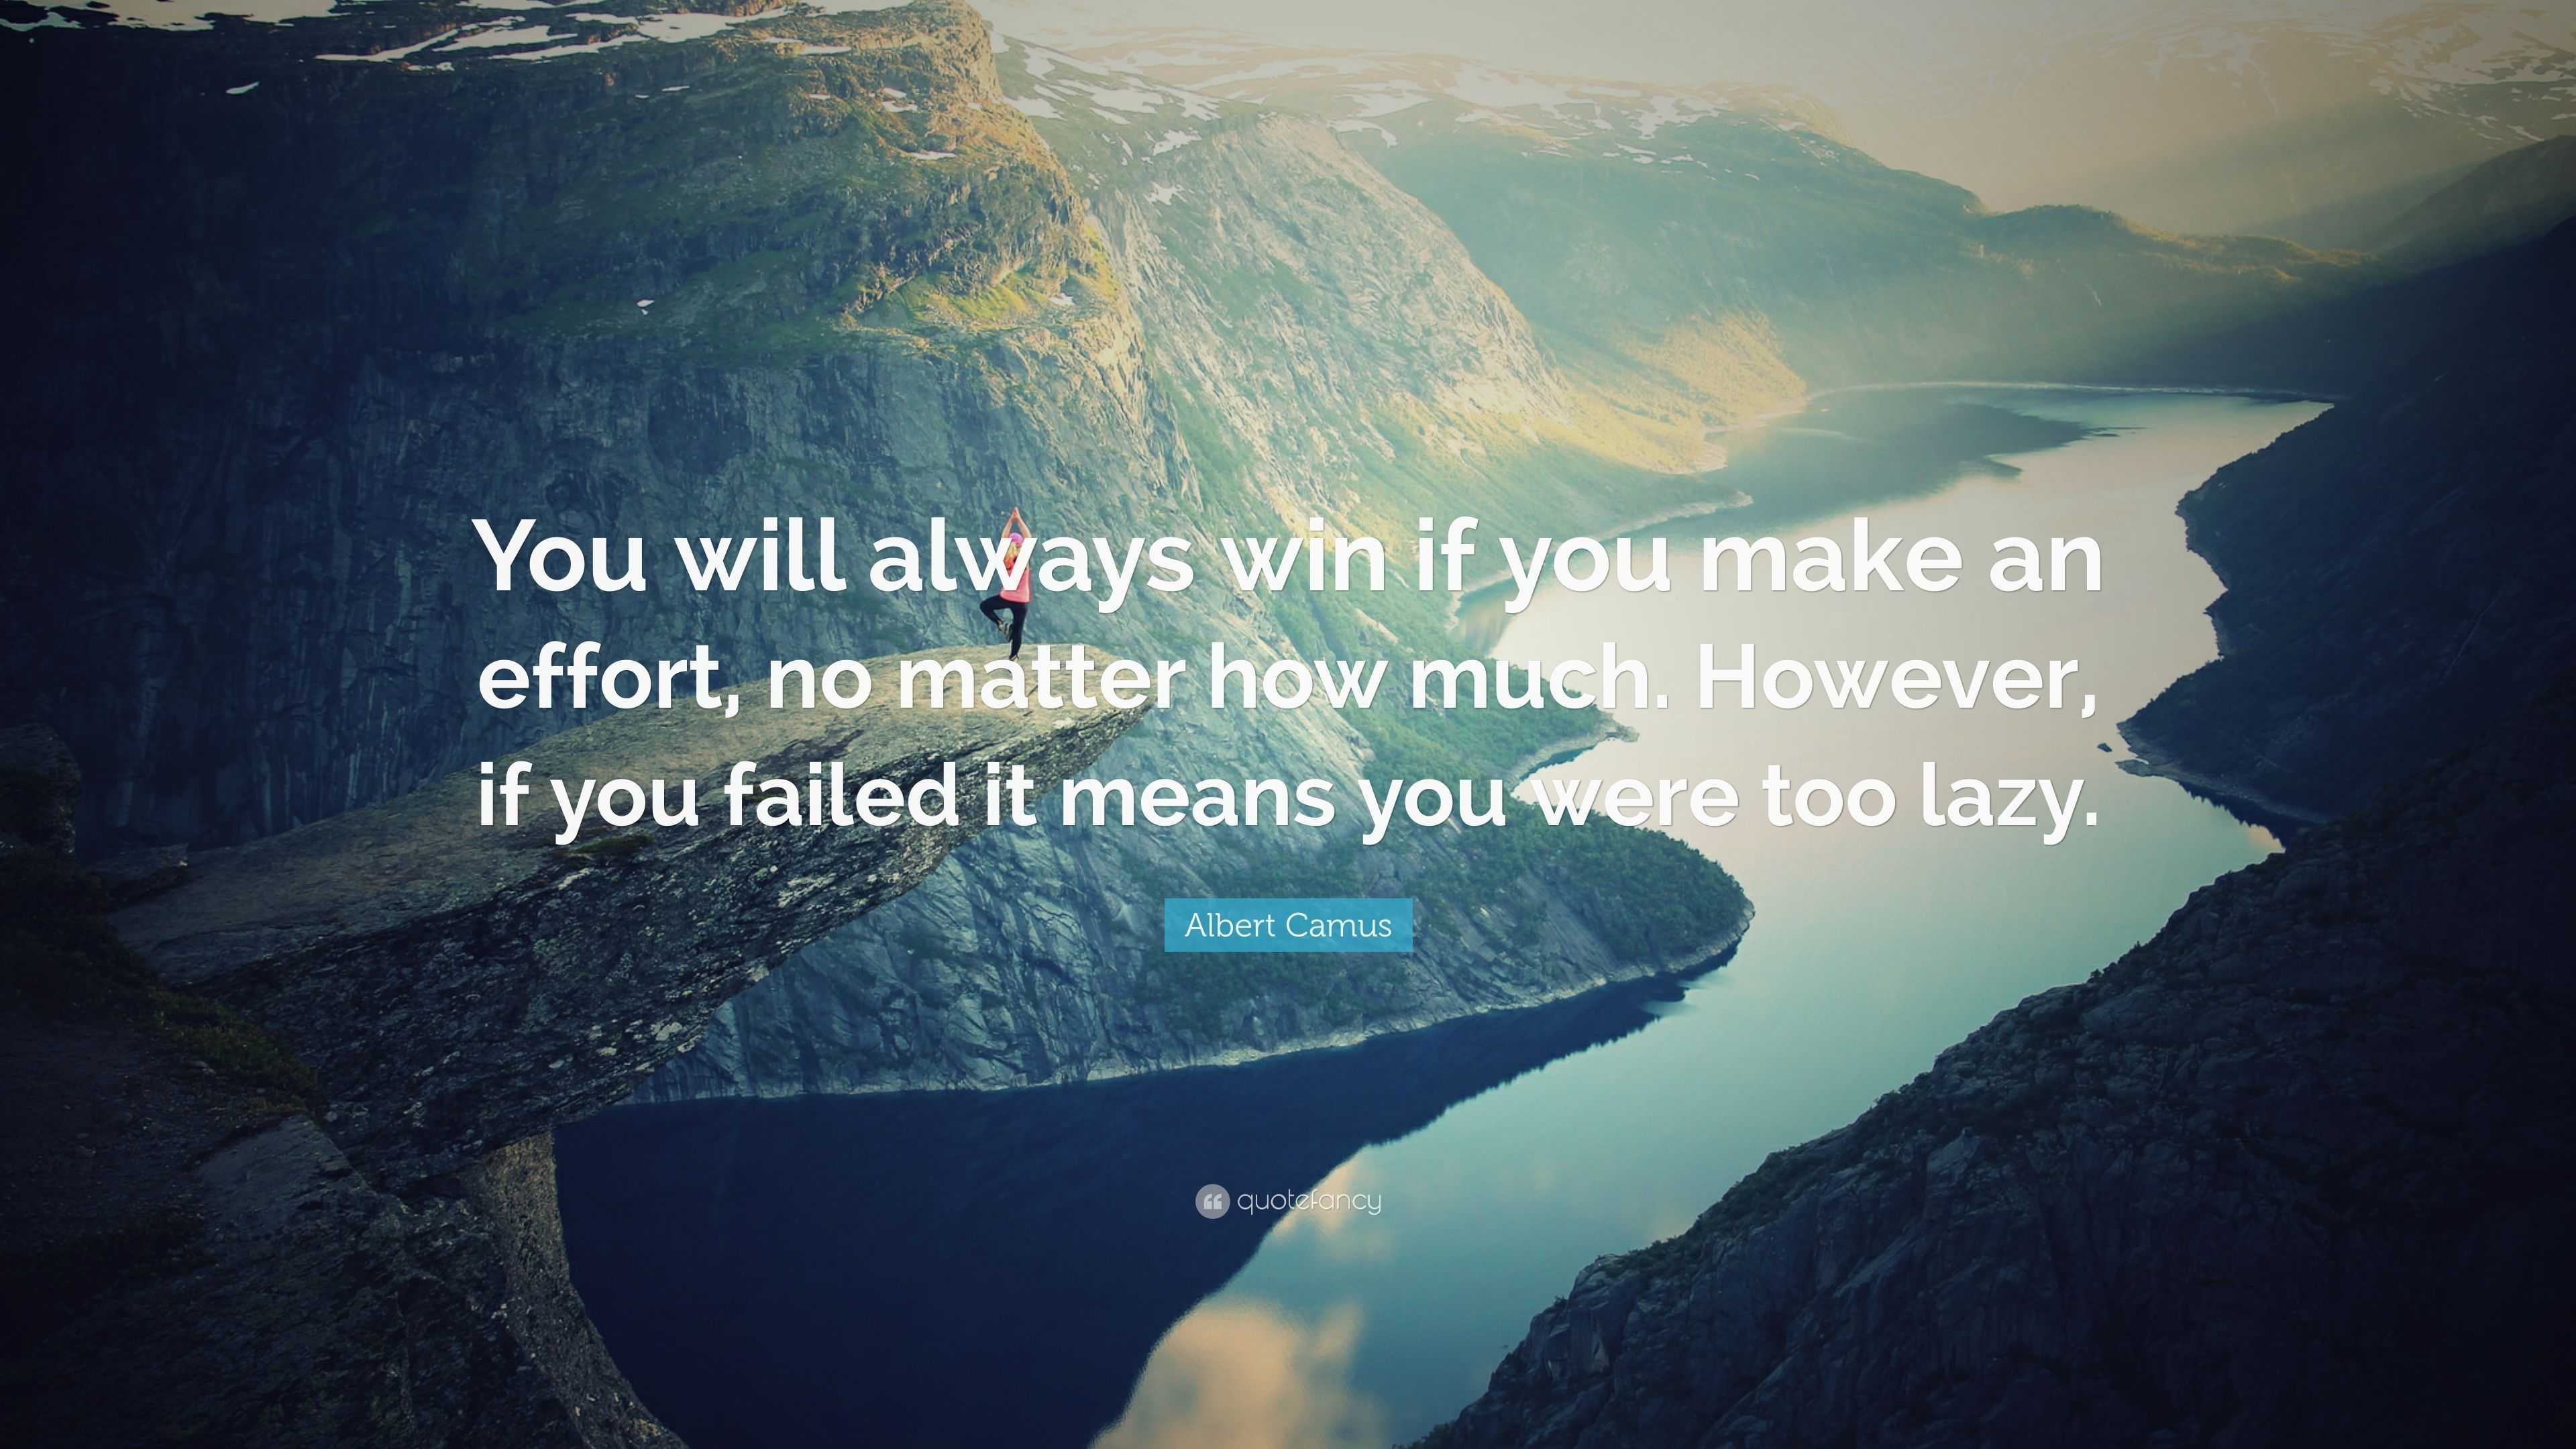 Albert Camus Quote: “You will always win if you make an effort, no ...